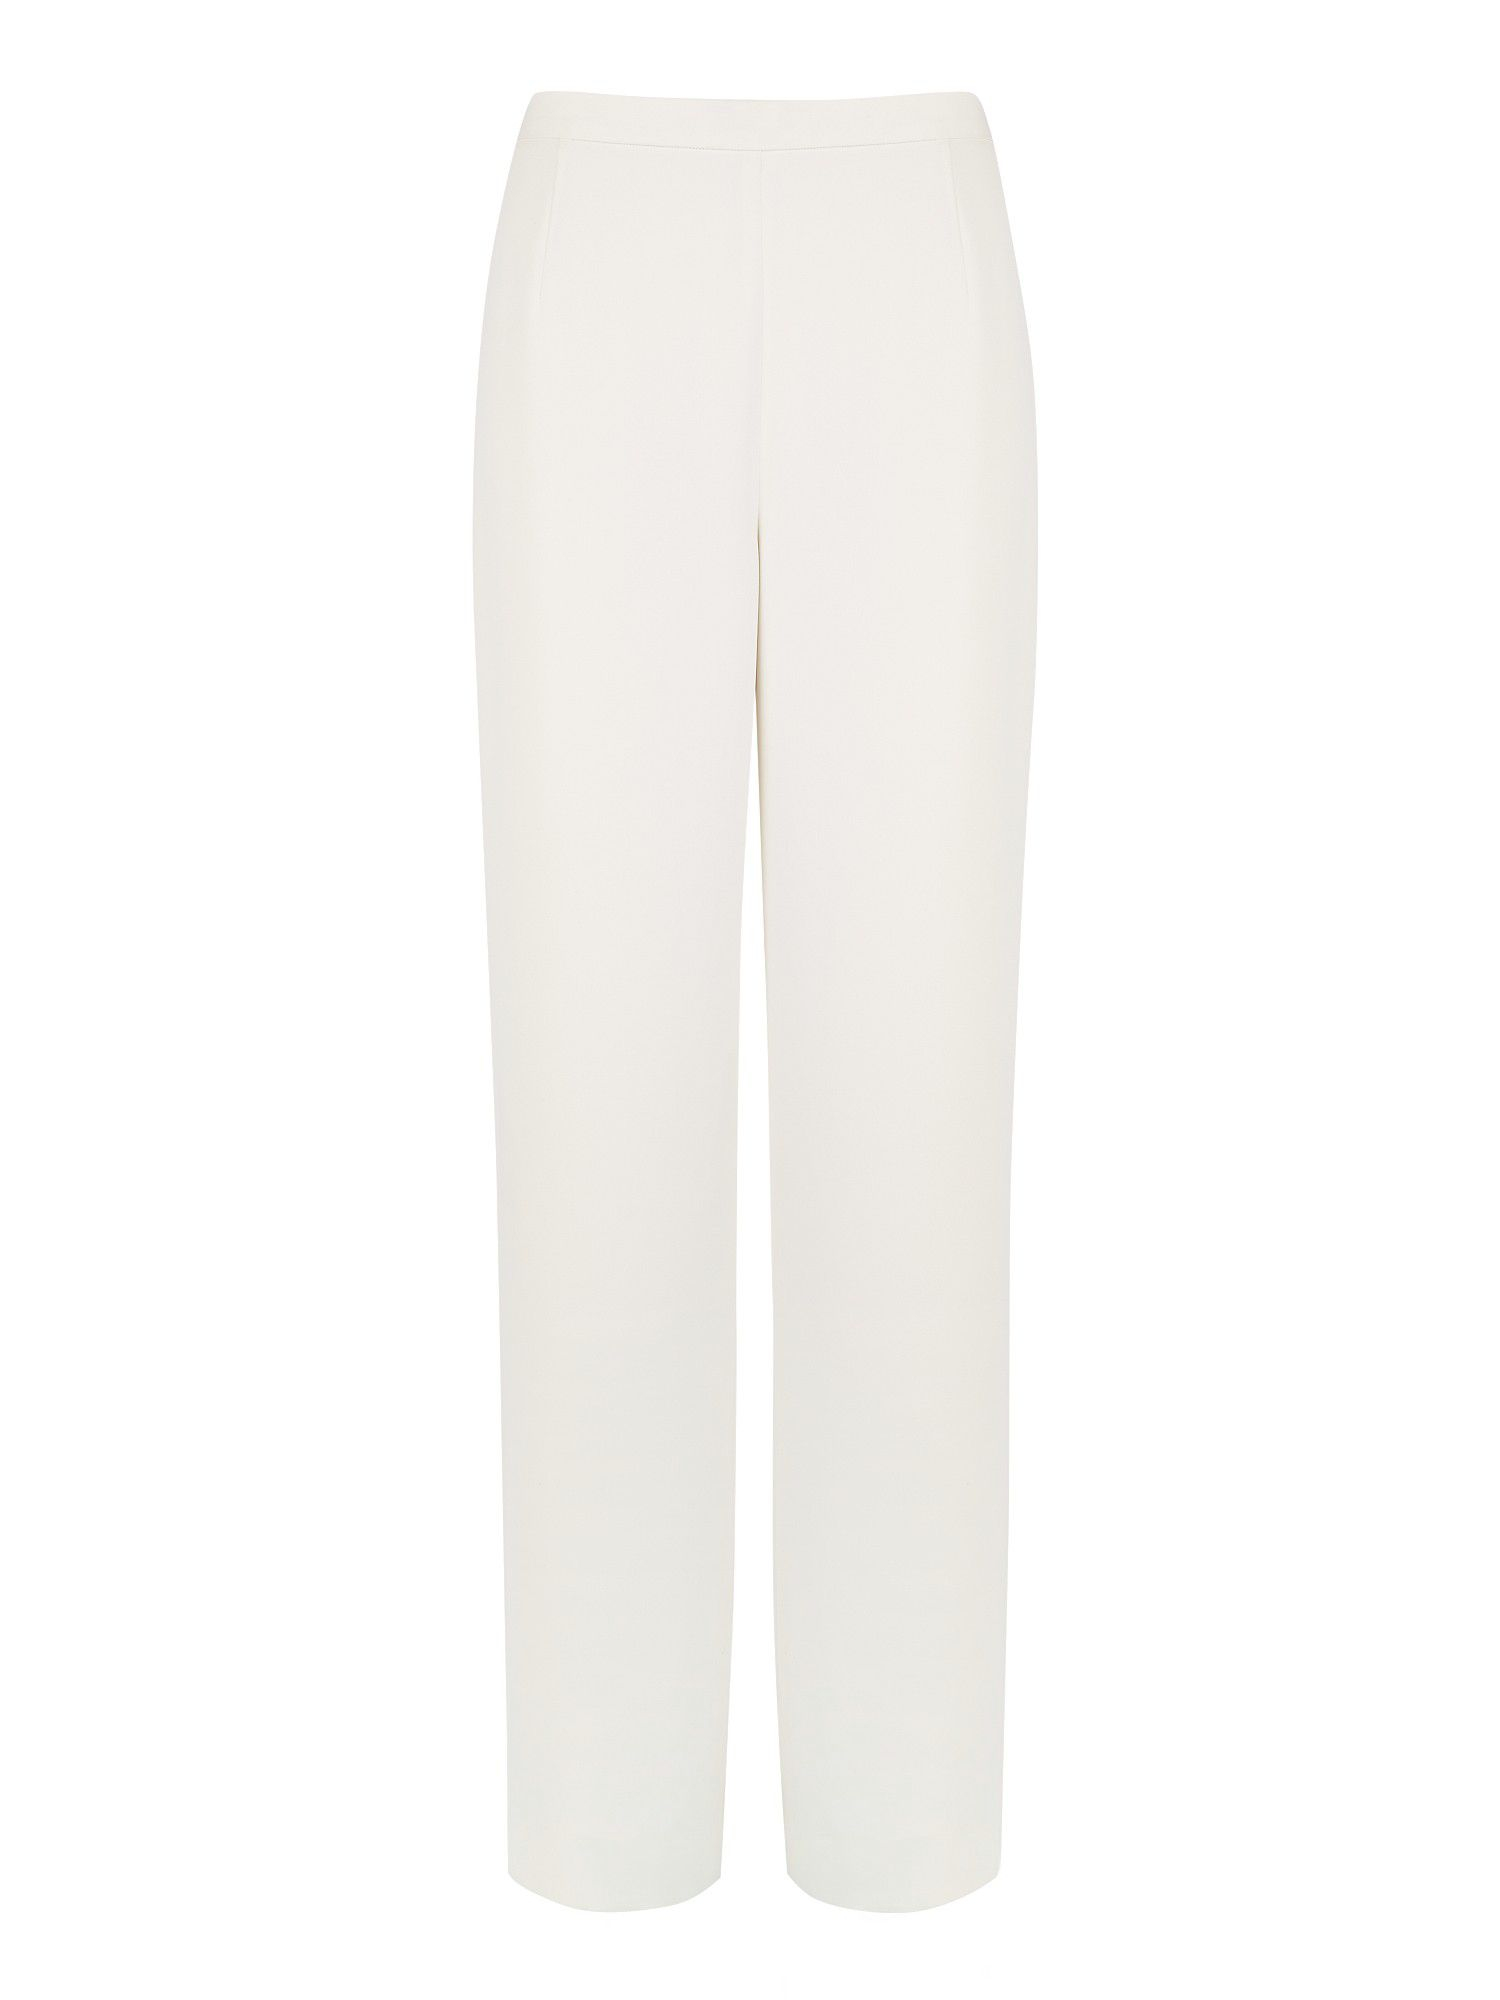 Jacques vert Cream Crepe Soft Trouser in White (Neutral) | Lyst